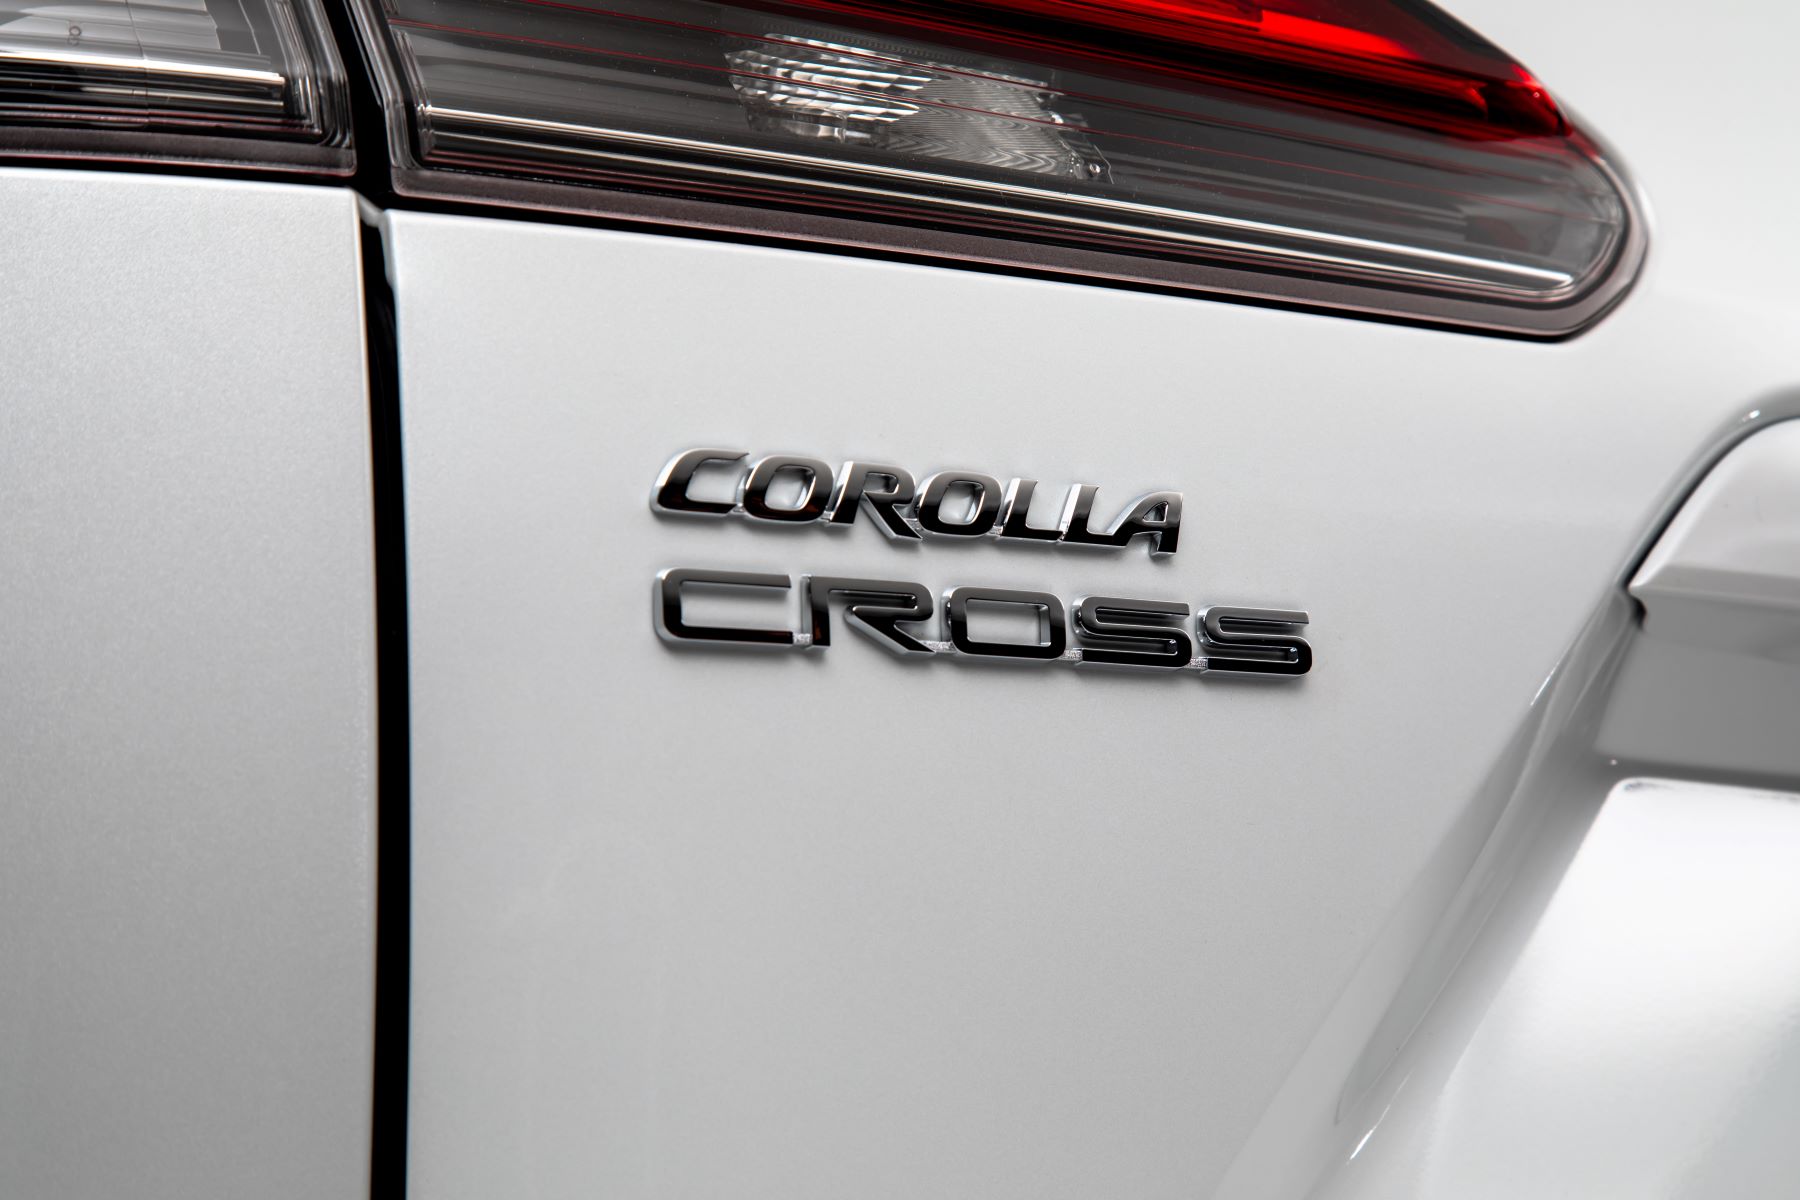 The 2022 Toyota Corolla Cross compact crossover SUV with Wind Chill Pearl paint color option and showing its model badging